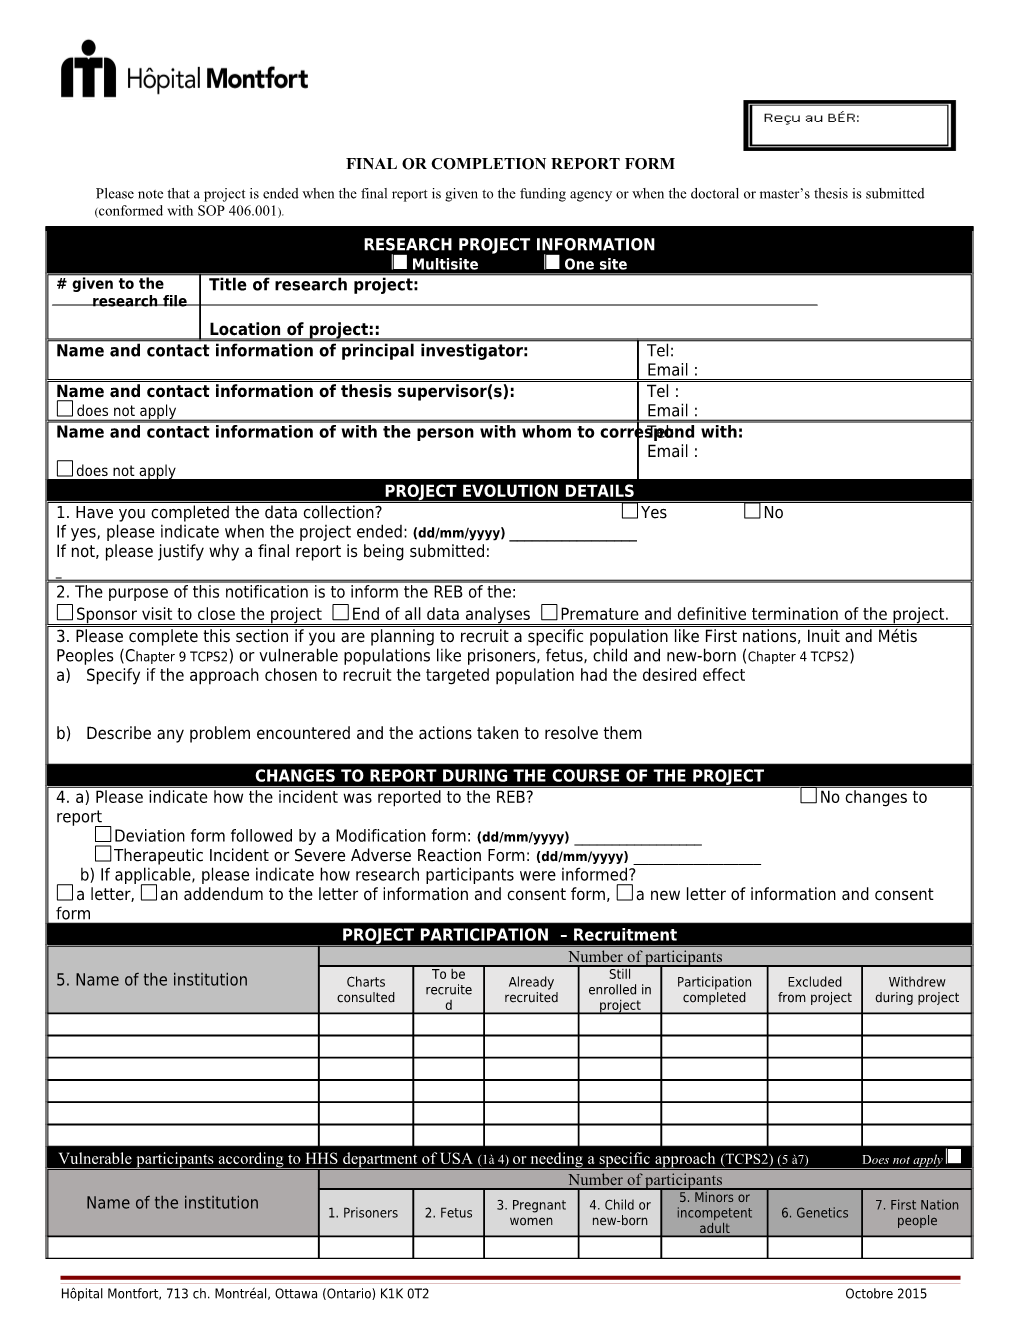 Final Or Completion Report Form